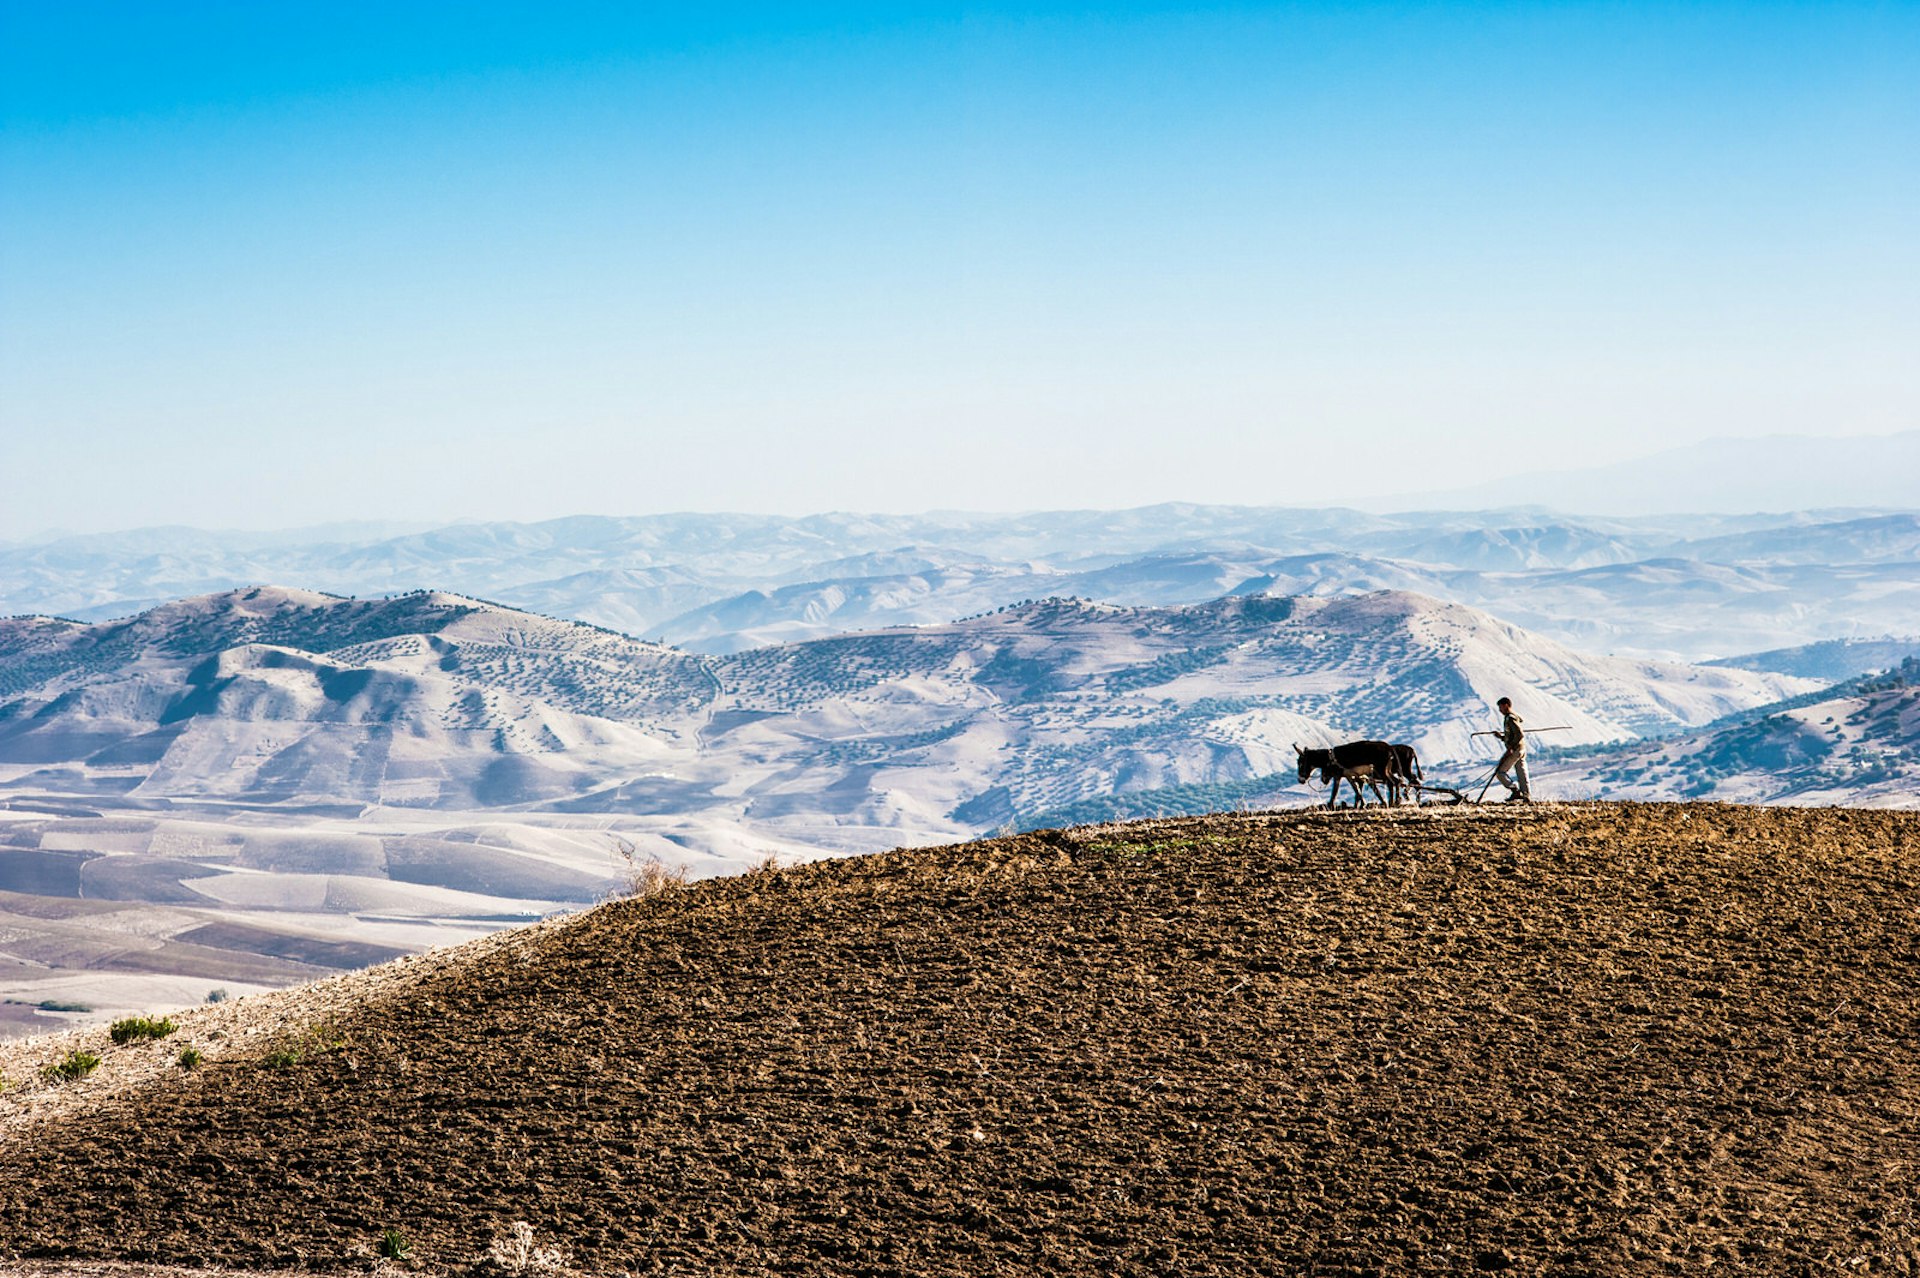 A farmer ploughing with his donkey in the High Atlas Mountains, Morocco